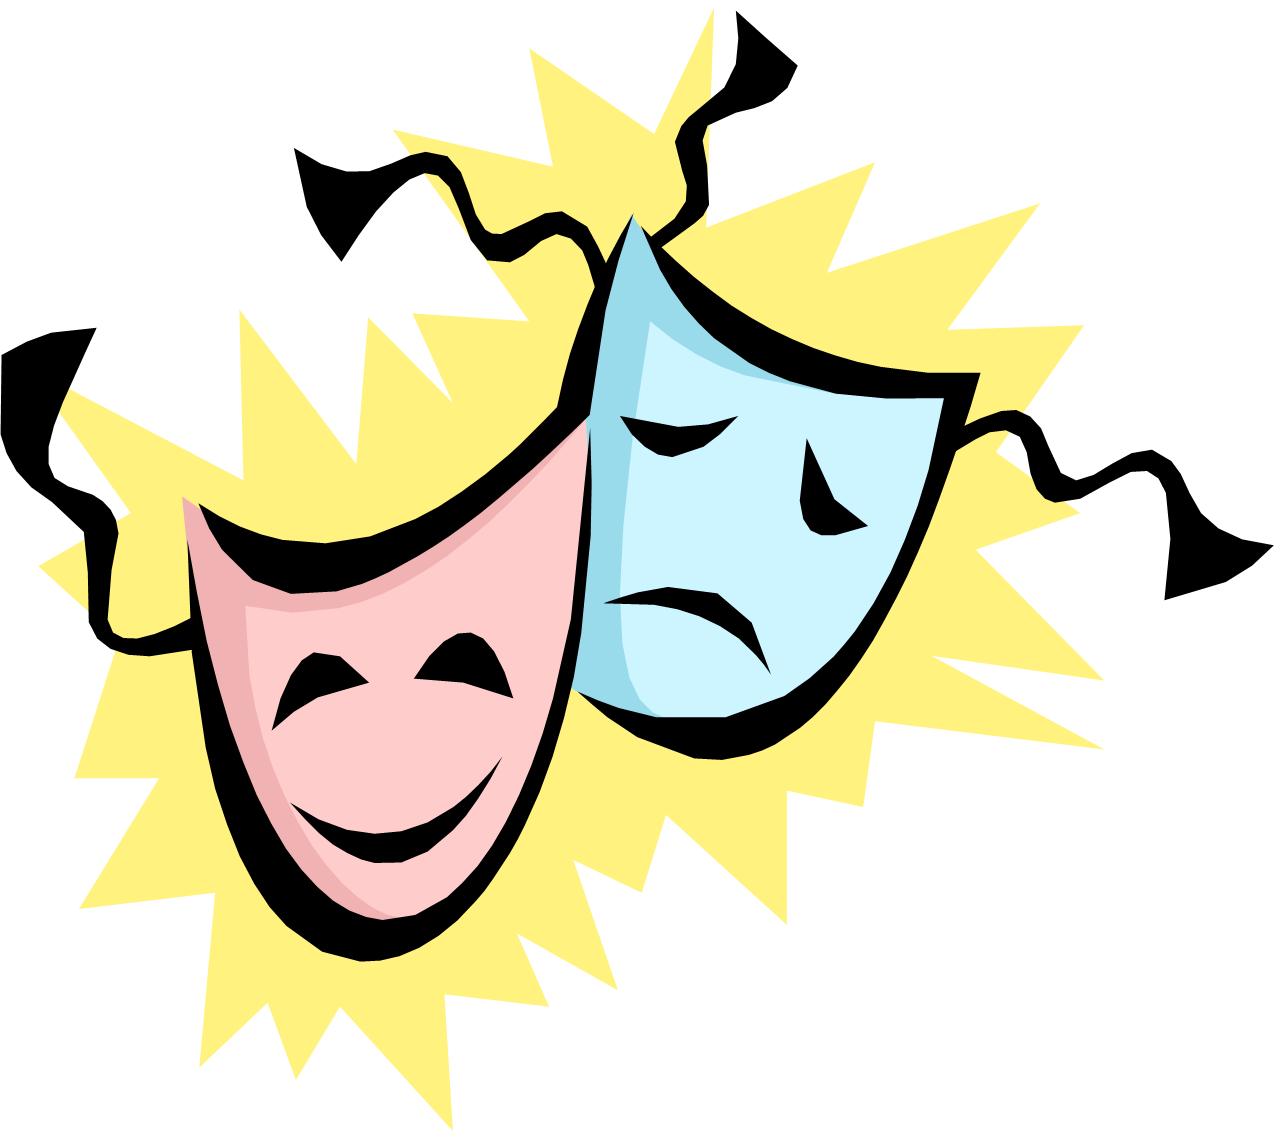 Theatrical Masks Images - ClipArt Best